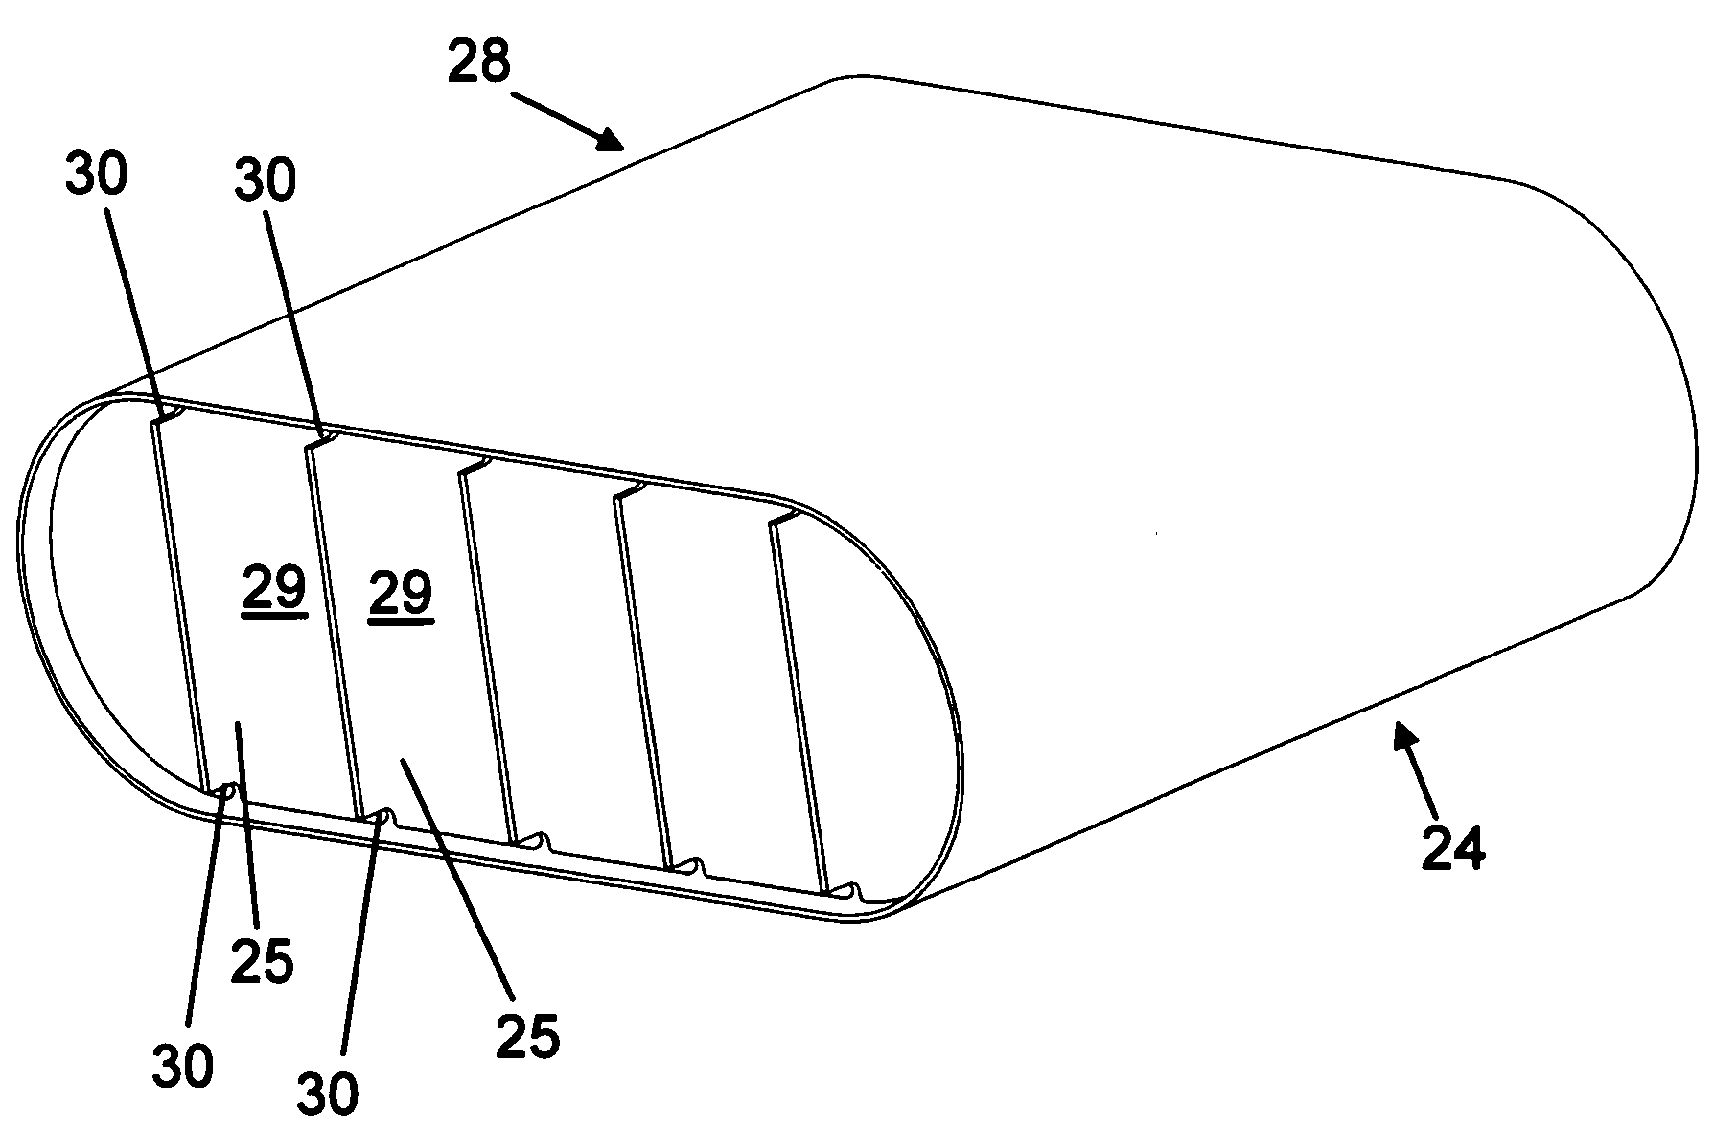 Inner container surrounded by an outer container, used for receiving a cryogenic liquid